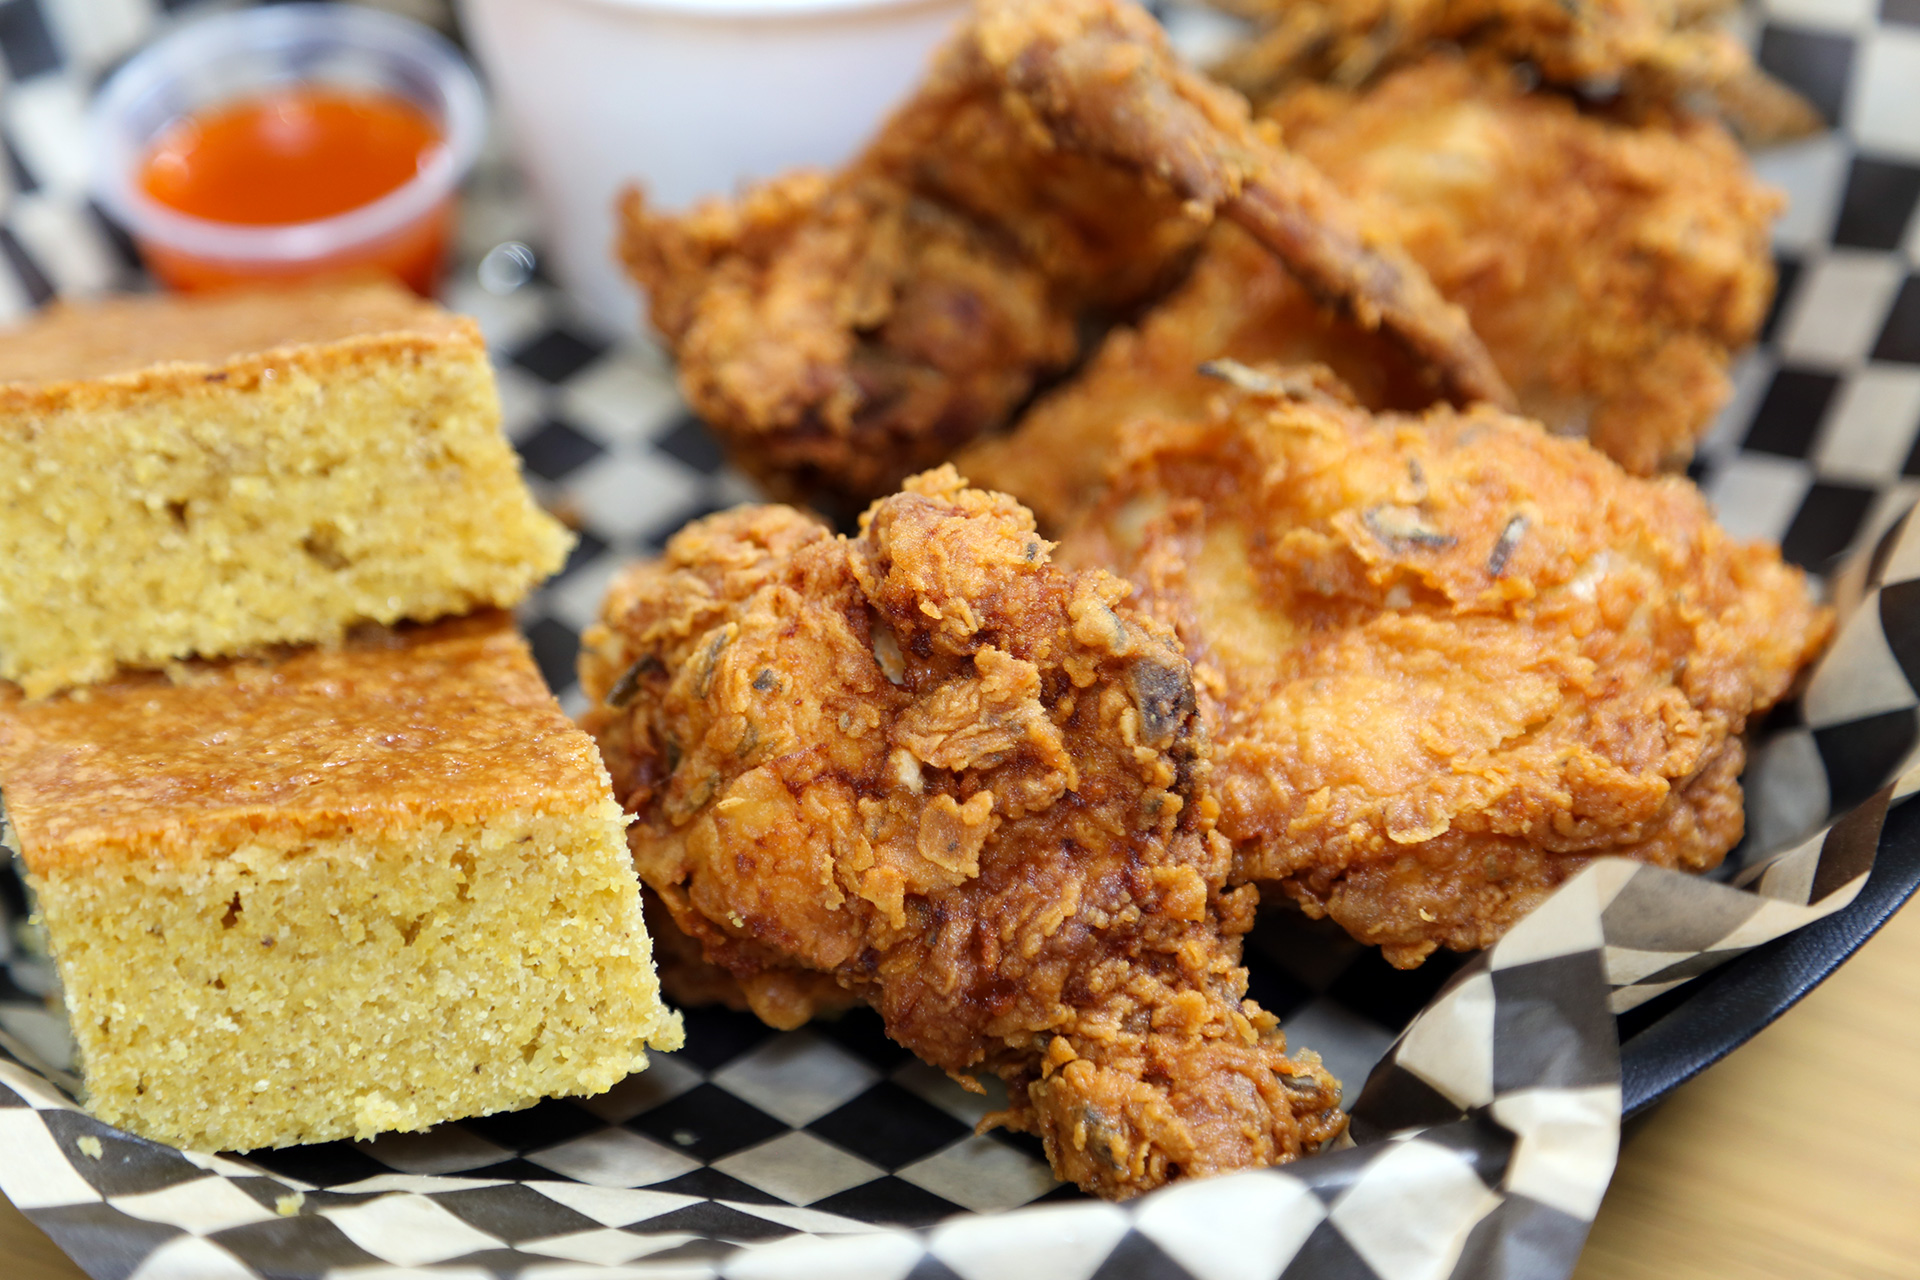 Millie Bell's Rosemary Fried Chicken and Cornbread.